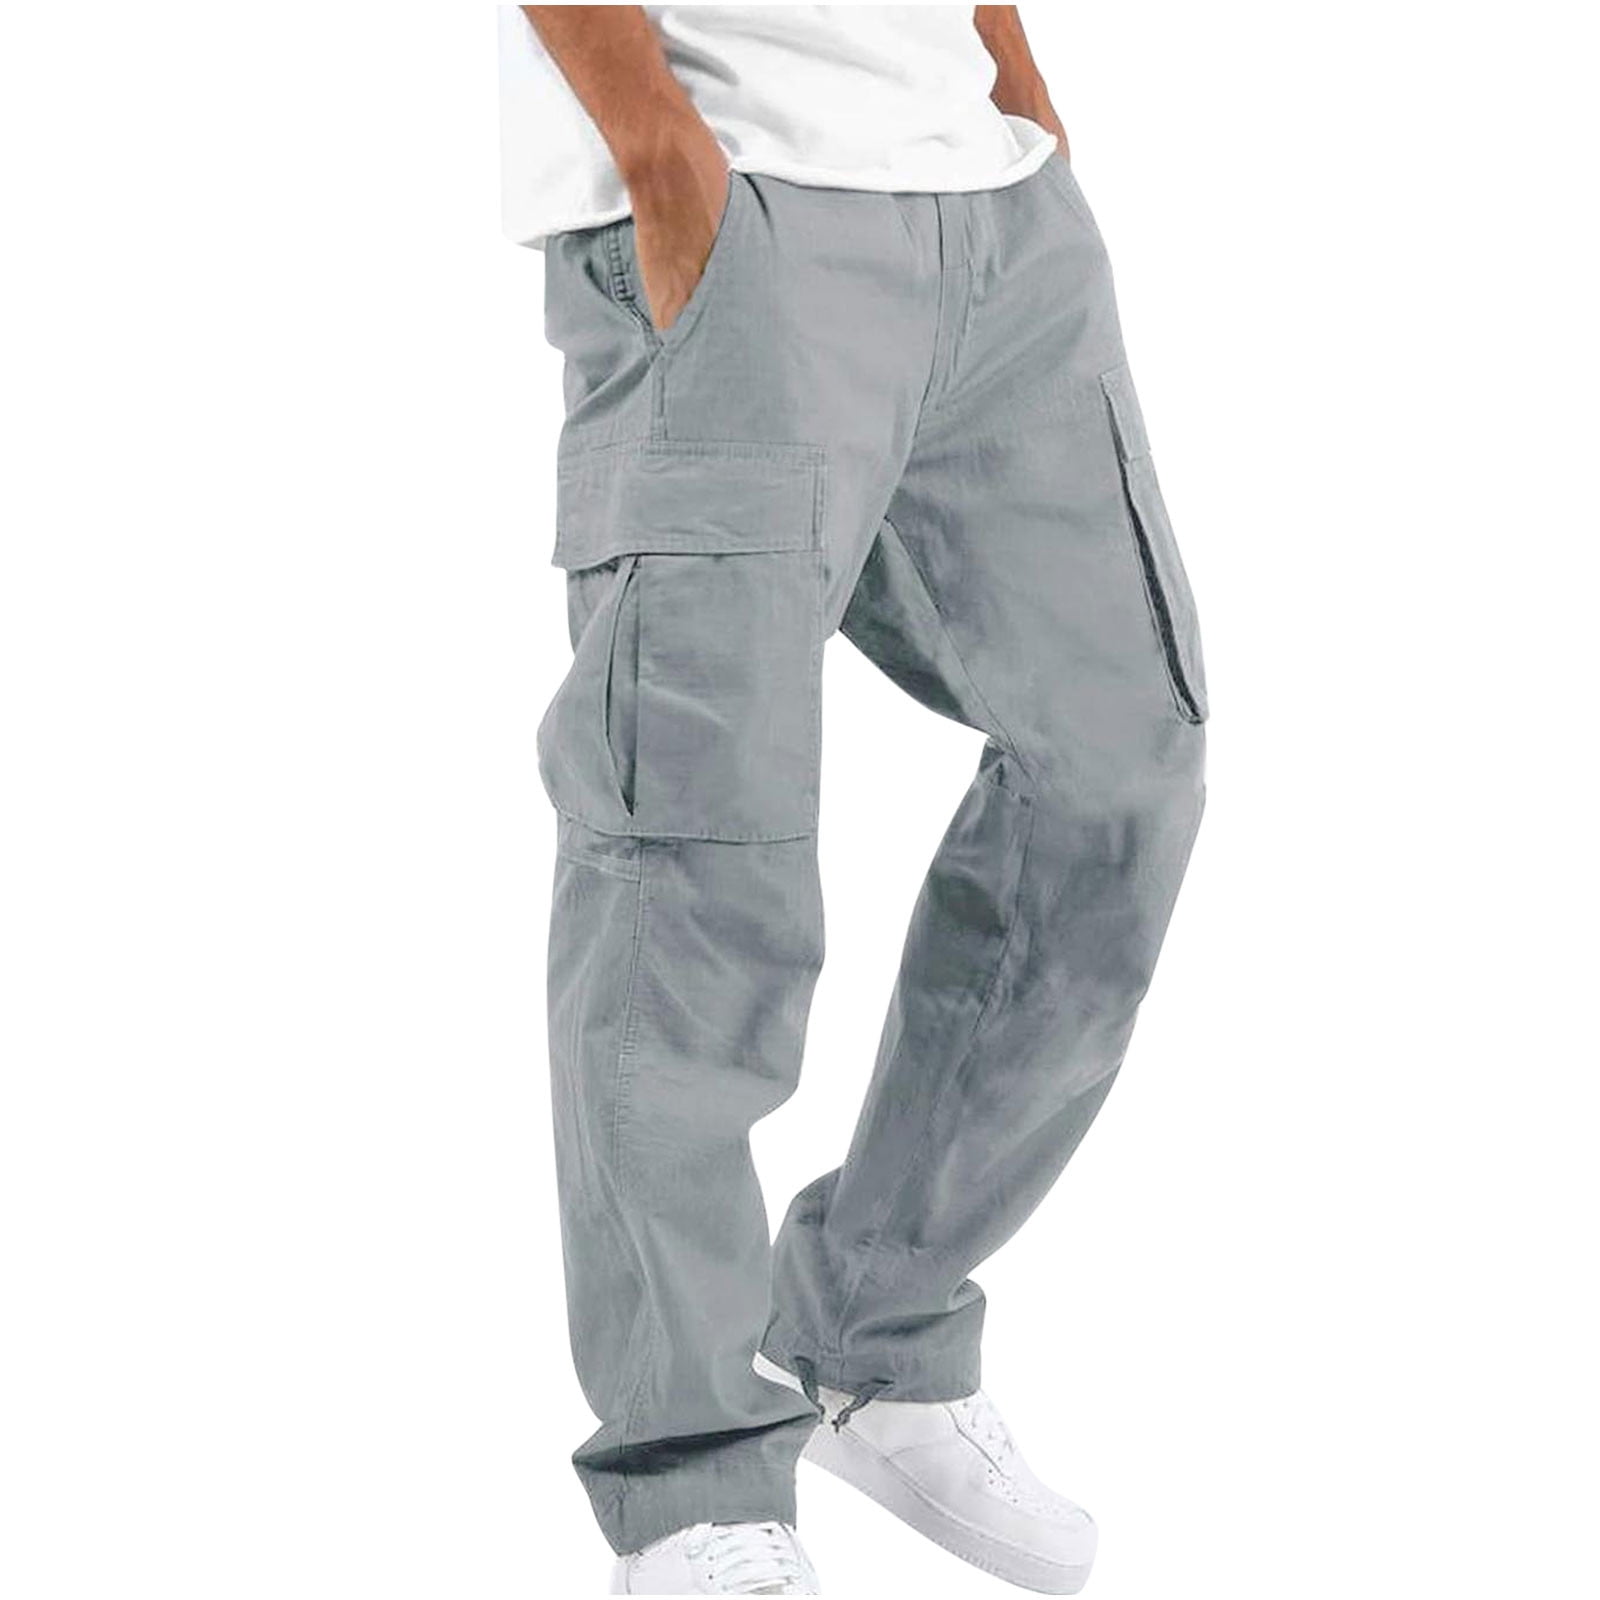 INSPI Oversized Trouser Baggy Pants with Drawstring for Men in Army Gr